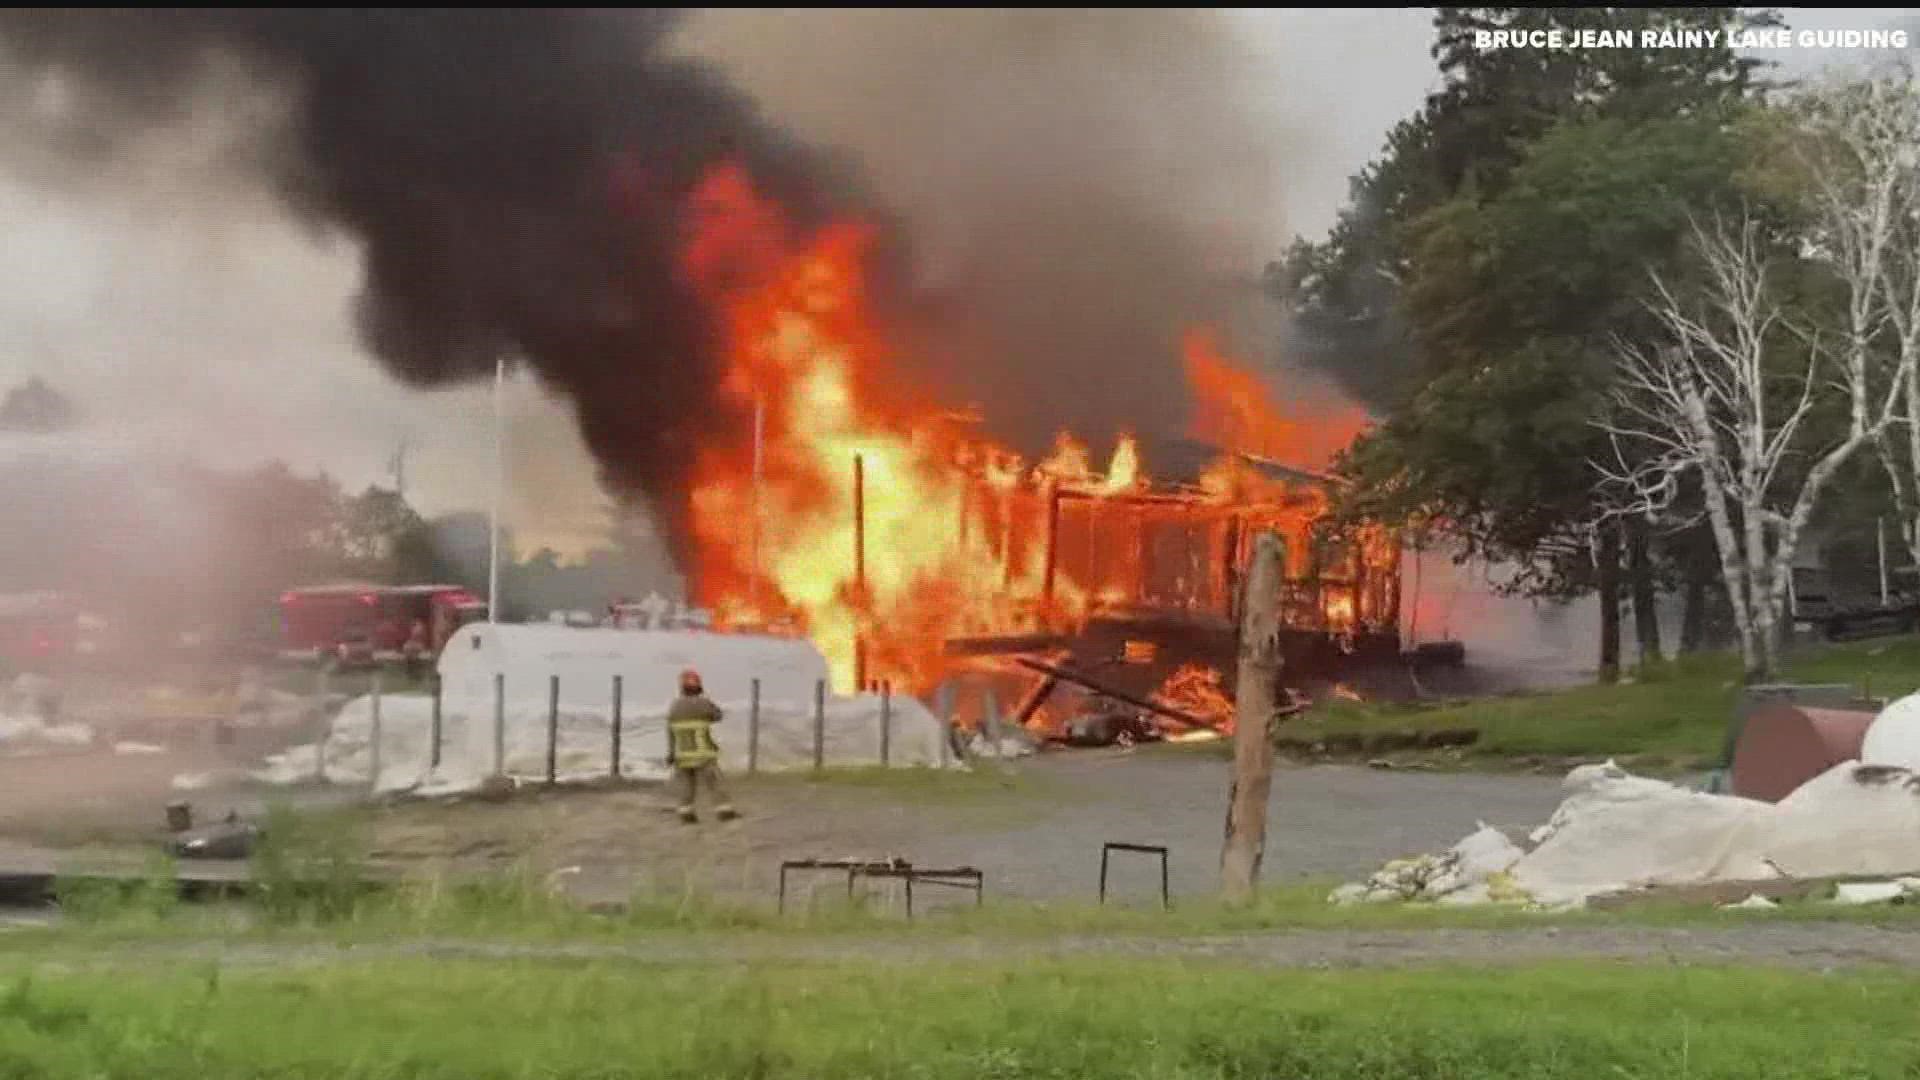 A fire at a houseboat business on Rainy Lake sent two people to the hospital on Wednesday.